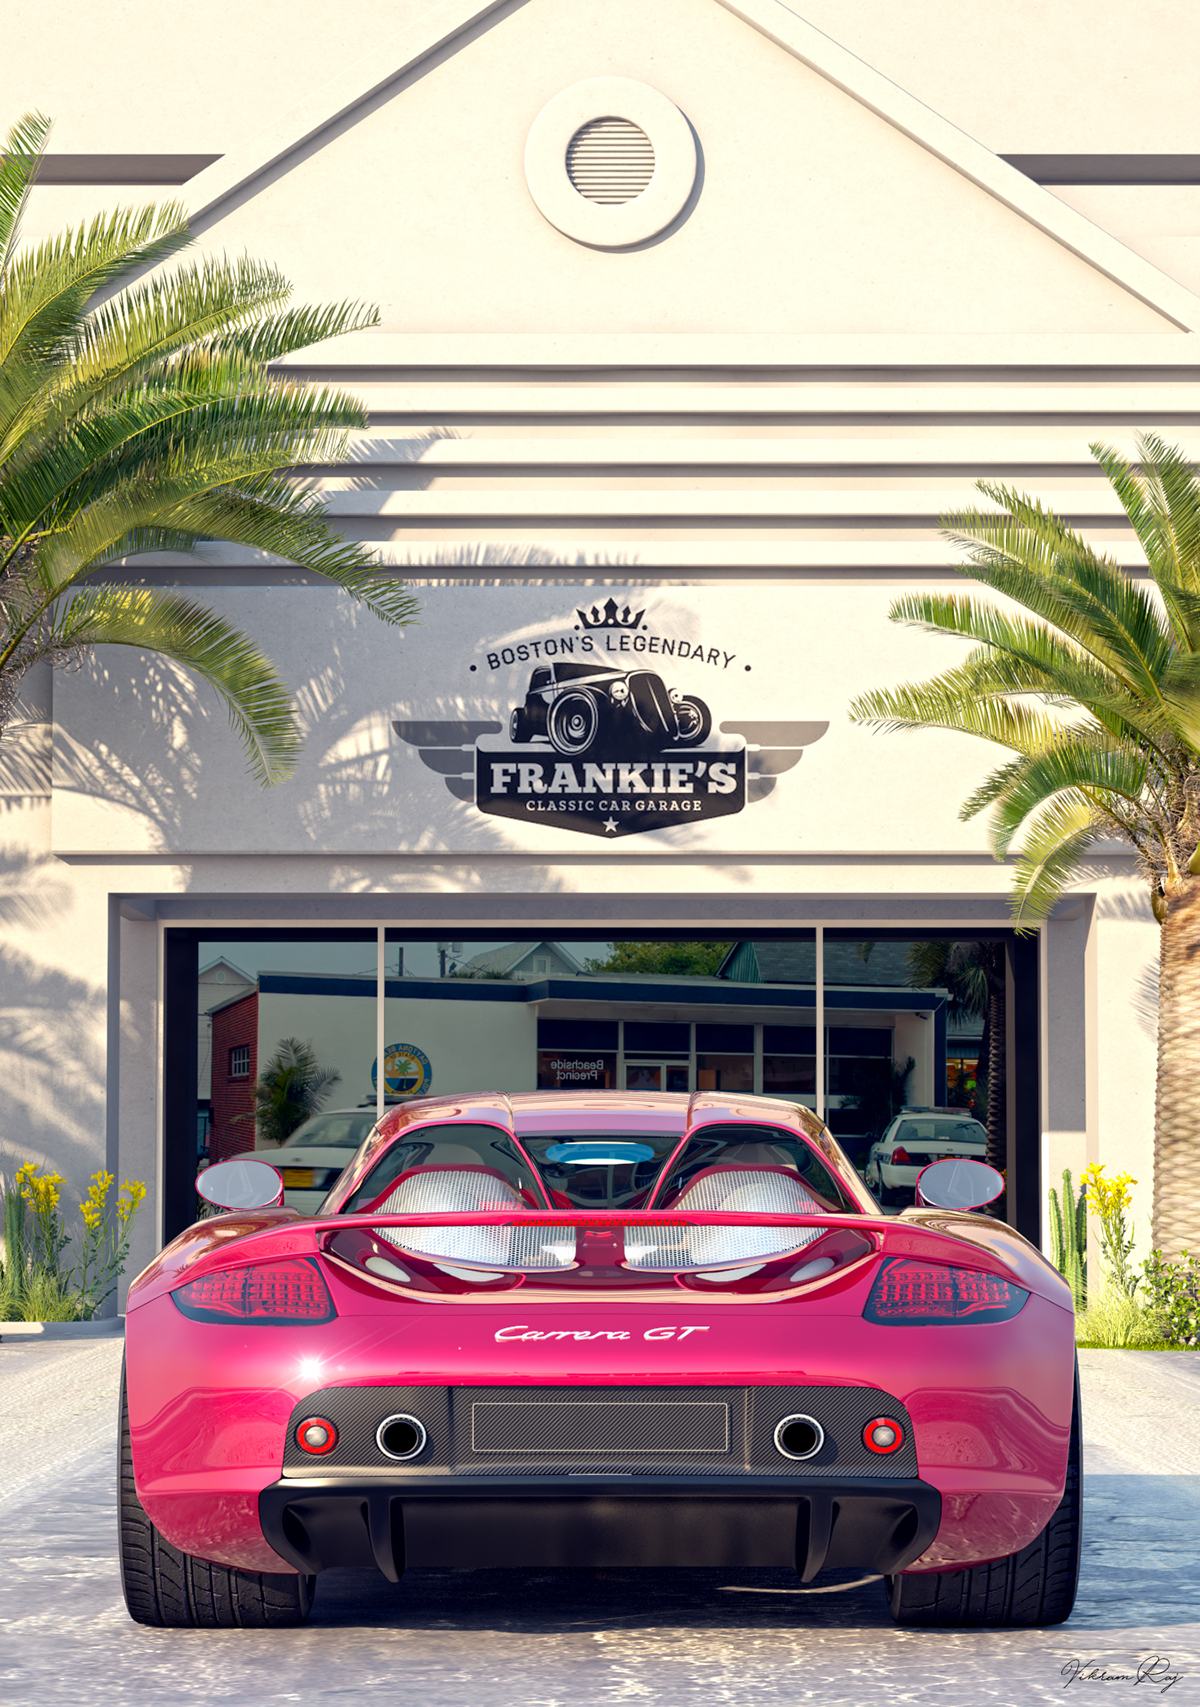 porsche carrera gt Cars scenery forest realistic 3D renders product automotive   industrial designs ILLUSTRATION 